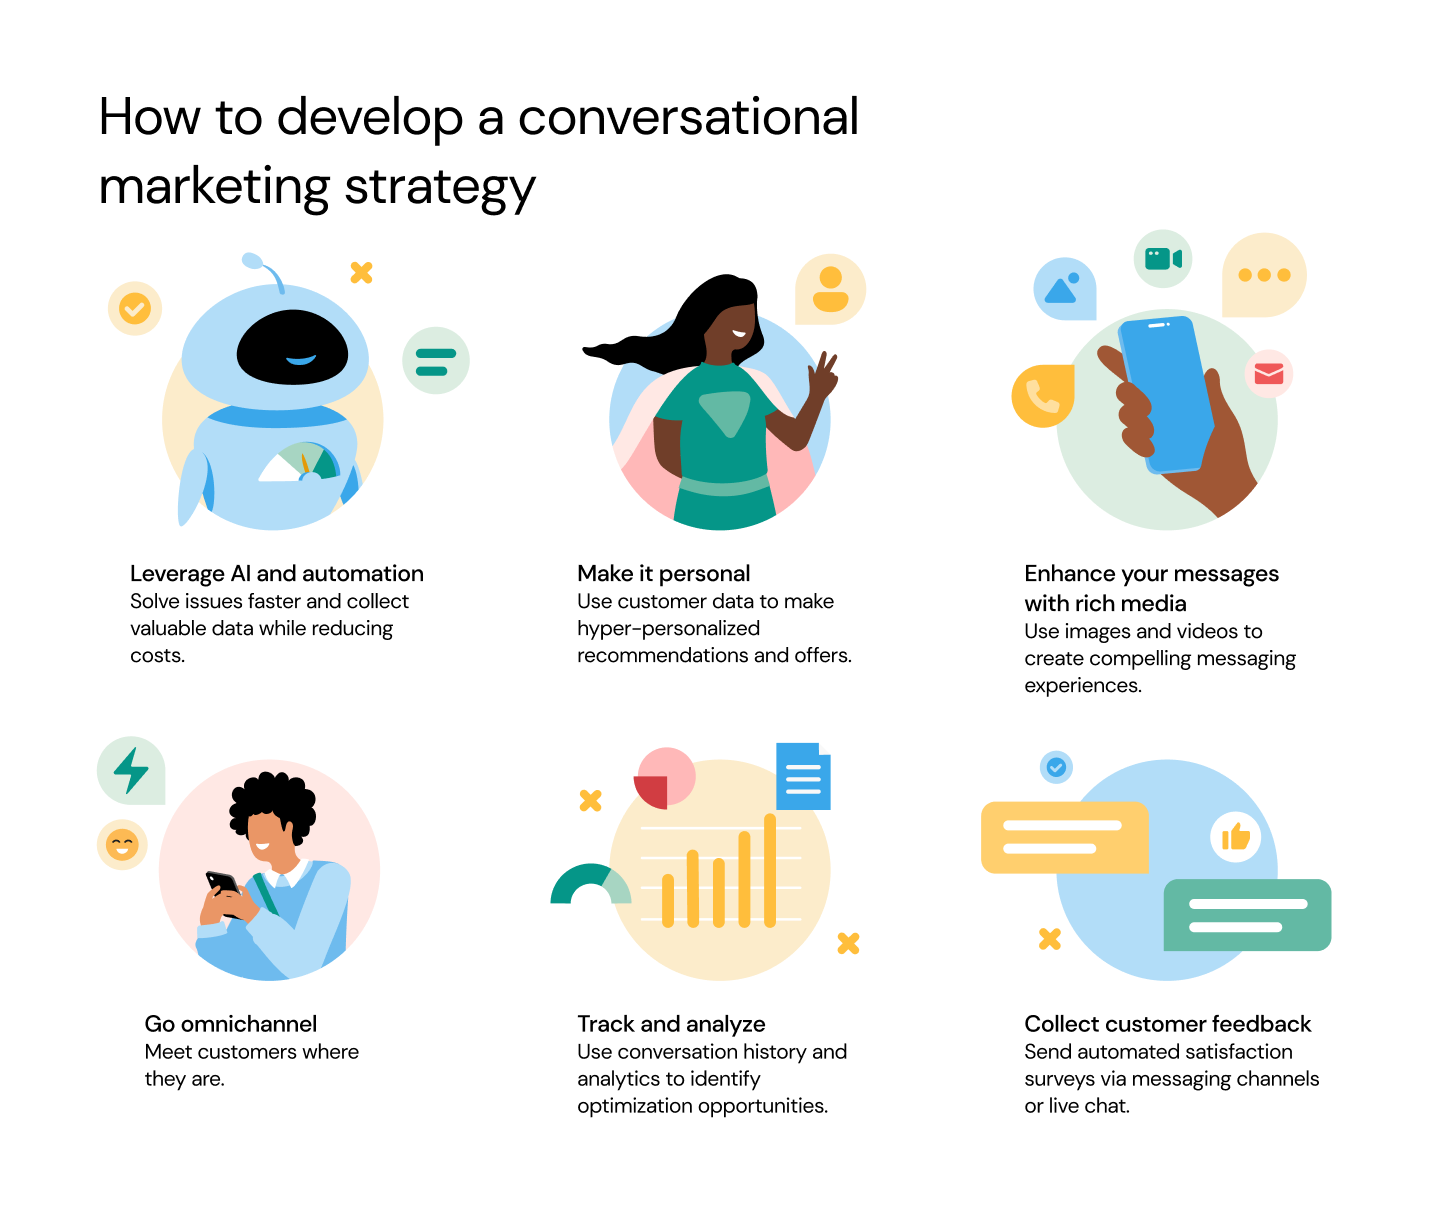 How to develop a conversational marketing strategy